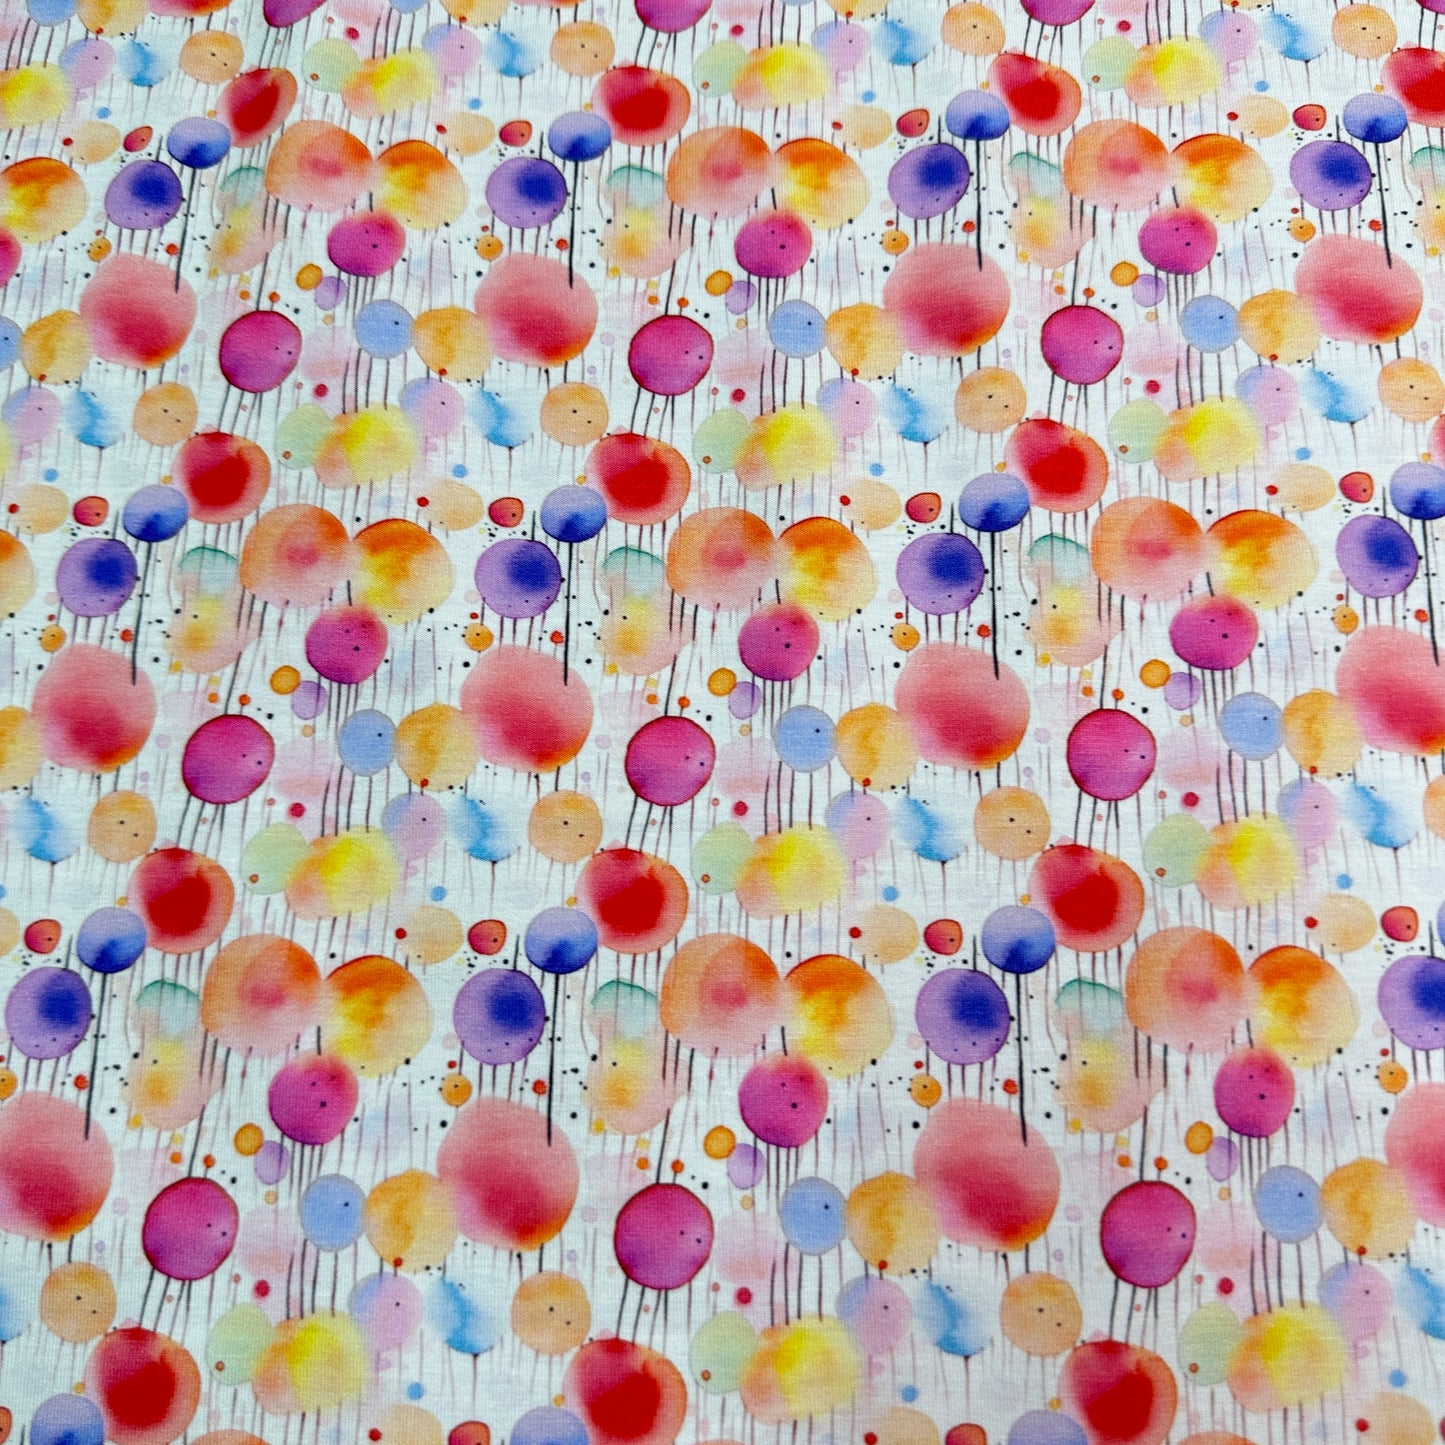 Watercolor Spots on Bamboo/Spandex Jersey Fabric